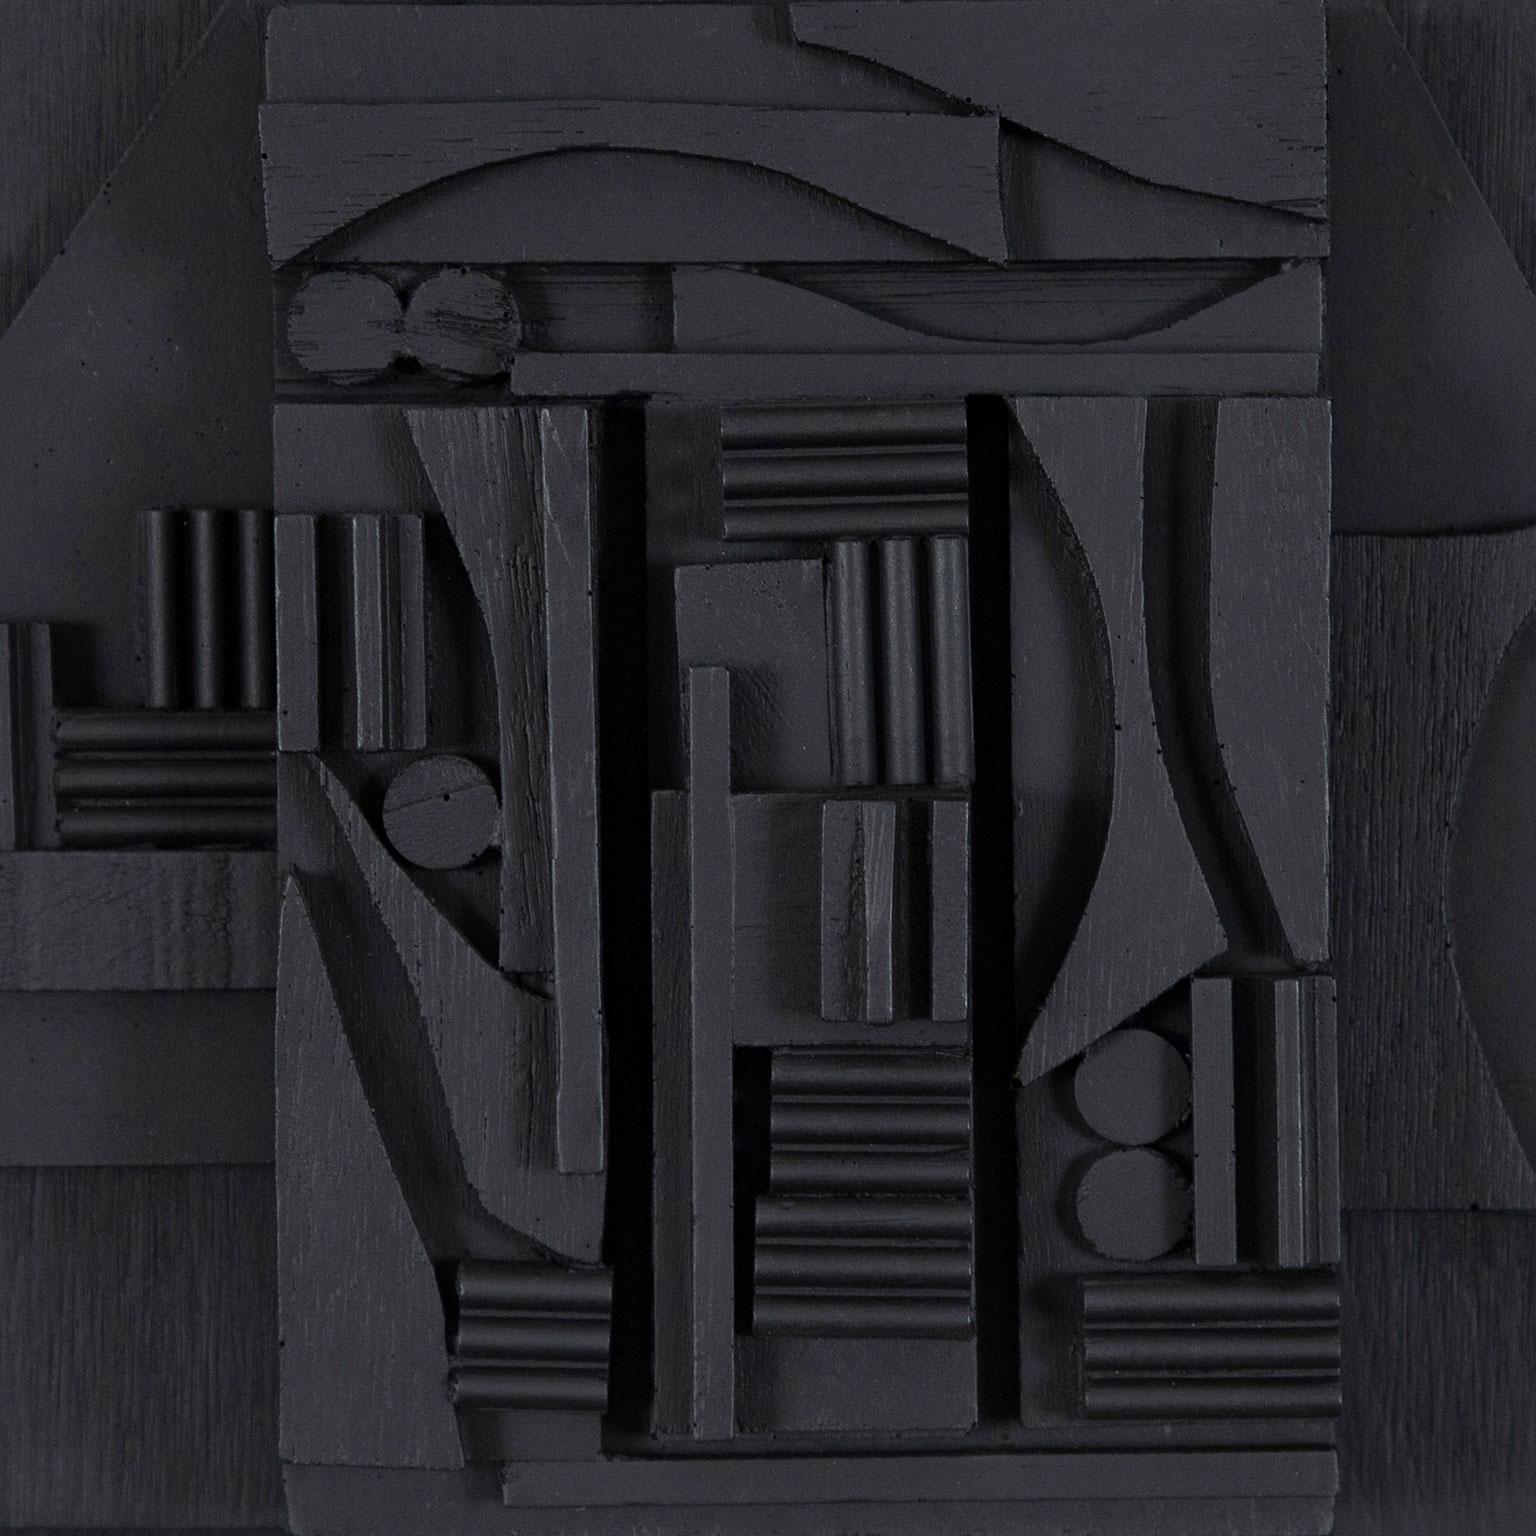 Louise Nevelson (1899-1988) is one of the most revered and unique artists of the 20th century.  

There has been a tremendous renewal of interest and appreciation for Nevelson’s work in recent years. In 2021, a new auction record of $1.35 million